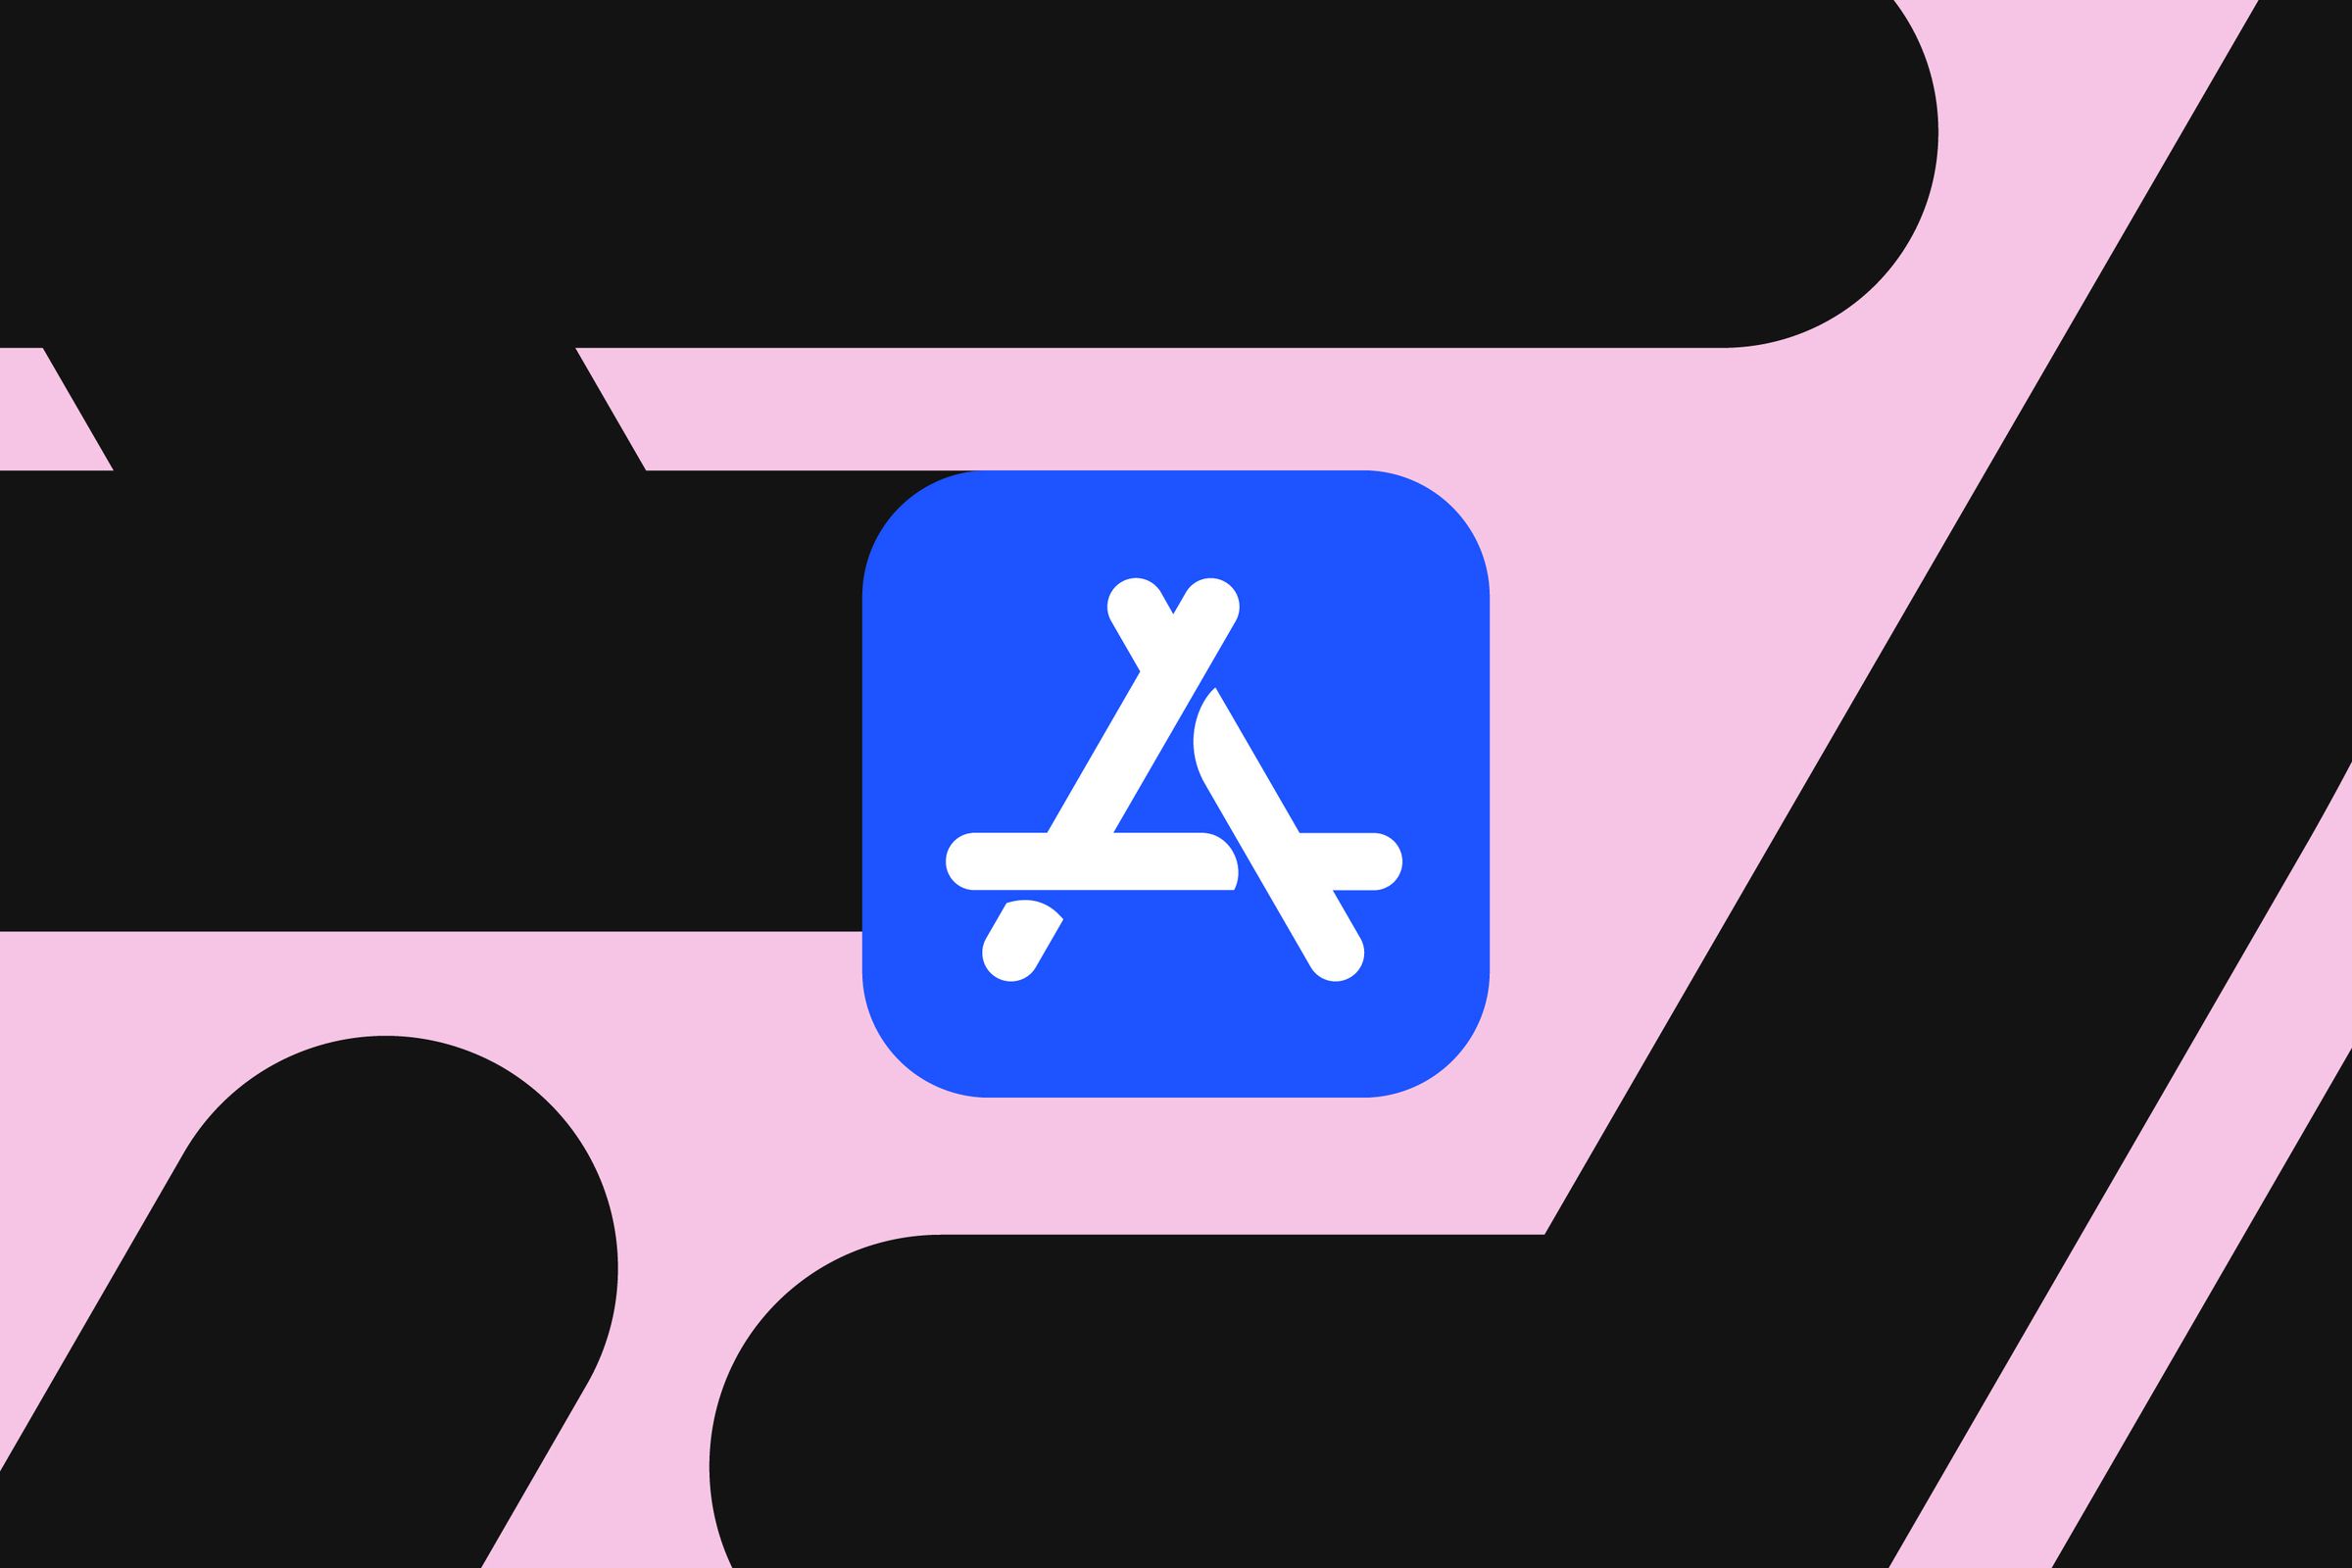 The image displays Apple’s blue App Store logo in front of a pink and black background.